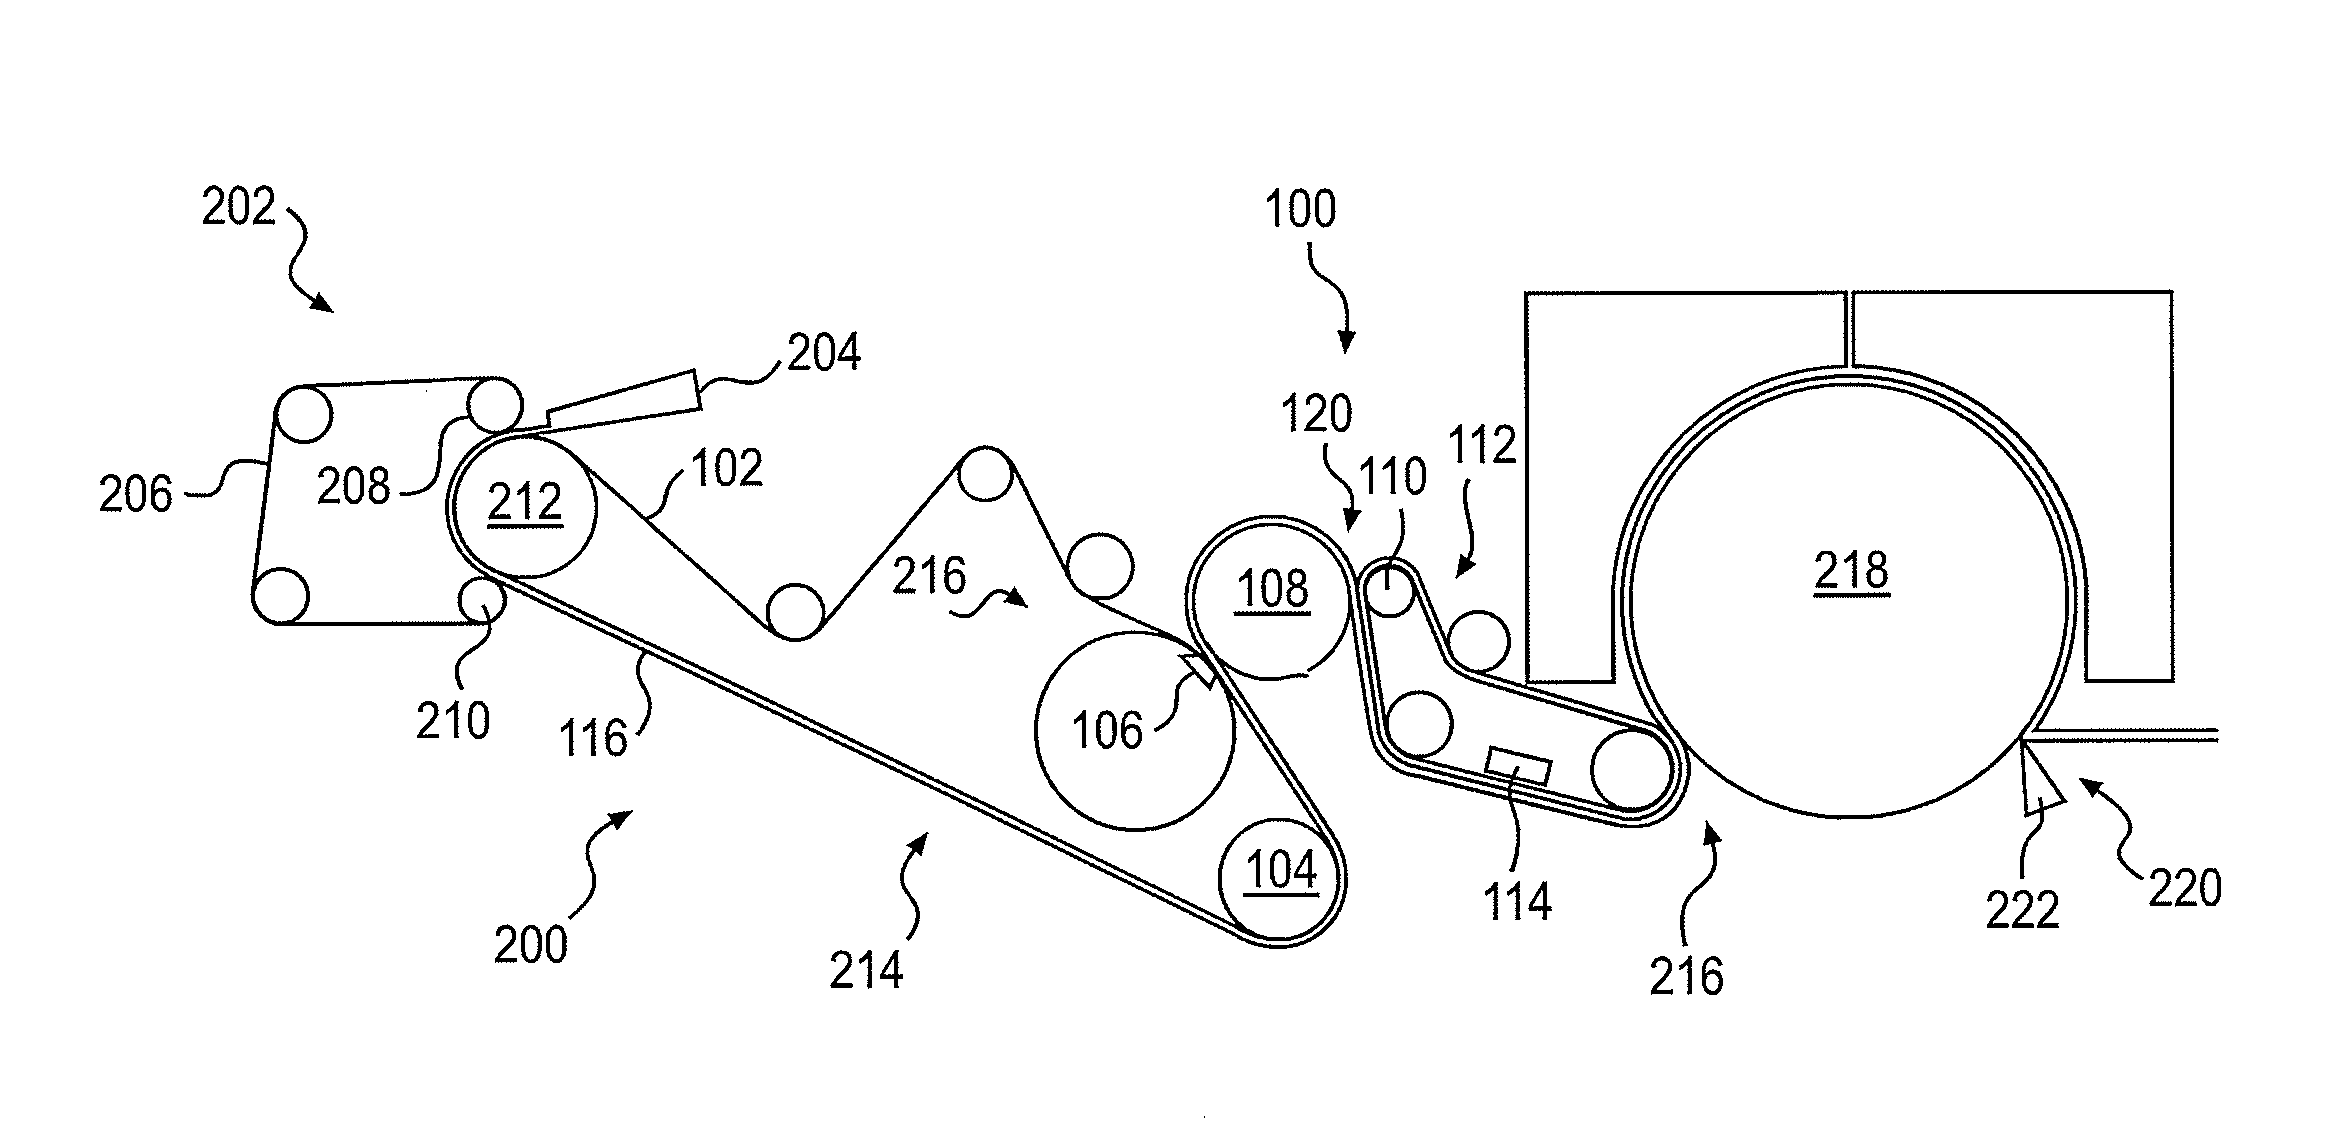 Multilayer belt for creping and structuring in a tissue making process